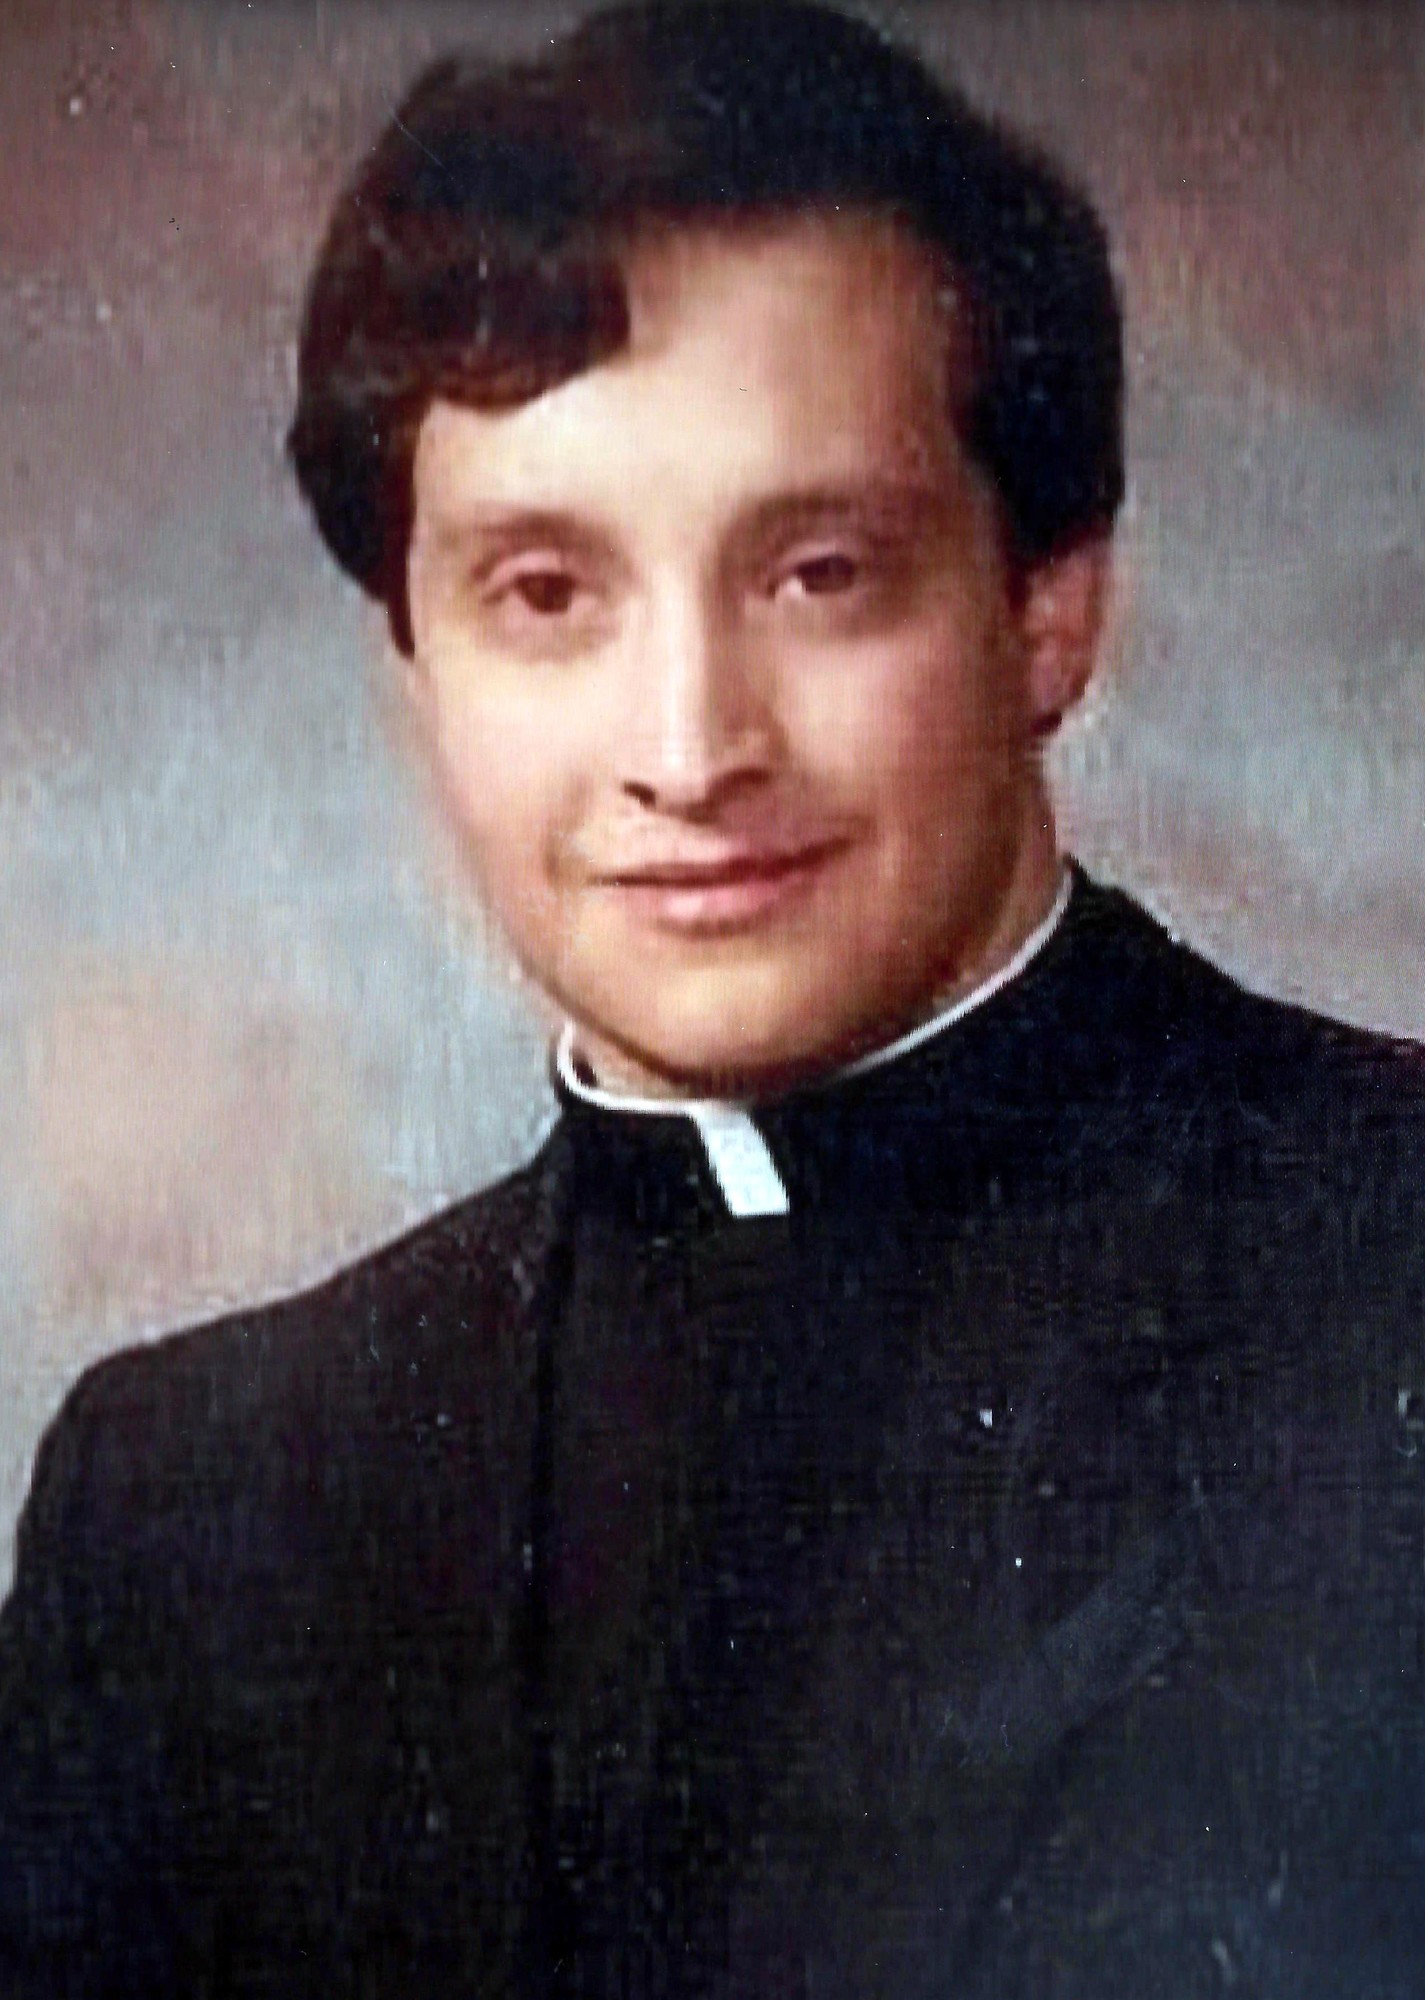 he was ordained into the priesthood in 1985 at St. Agnes in Rockville Centre.